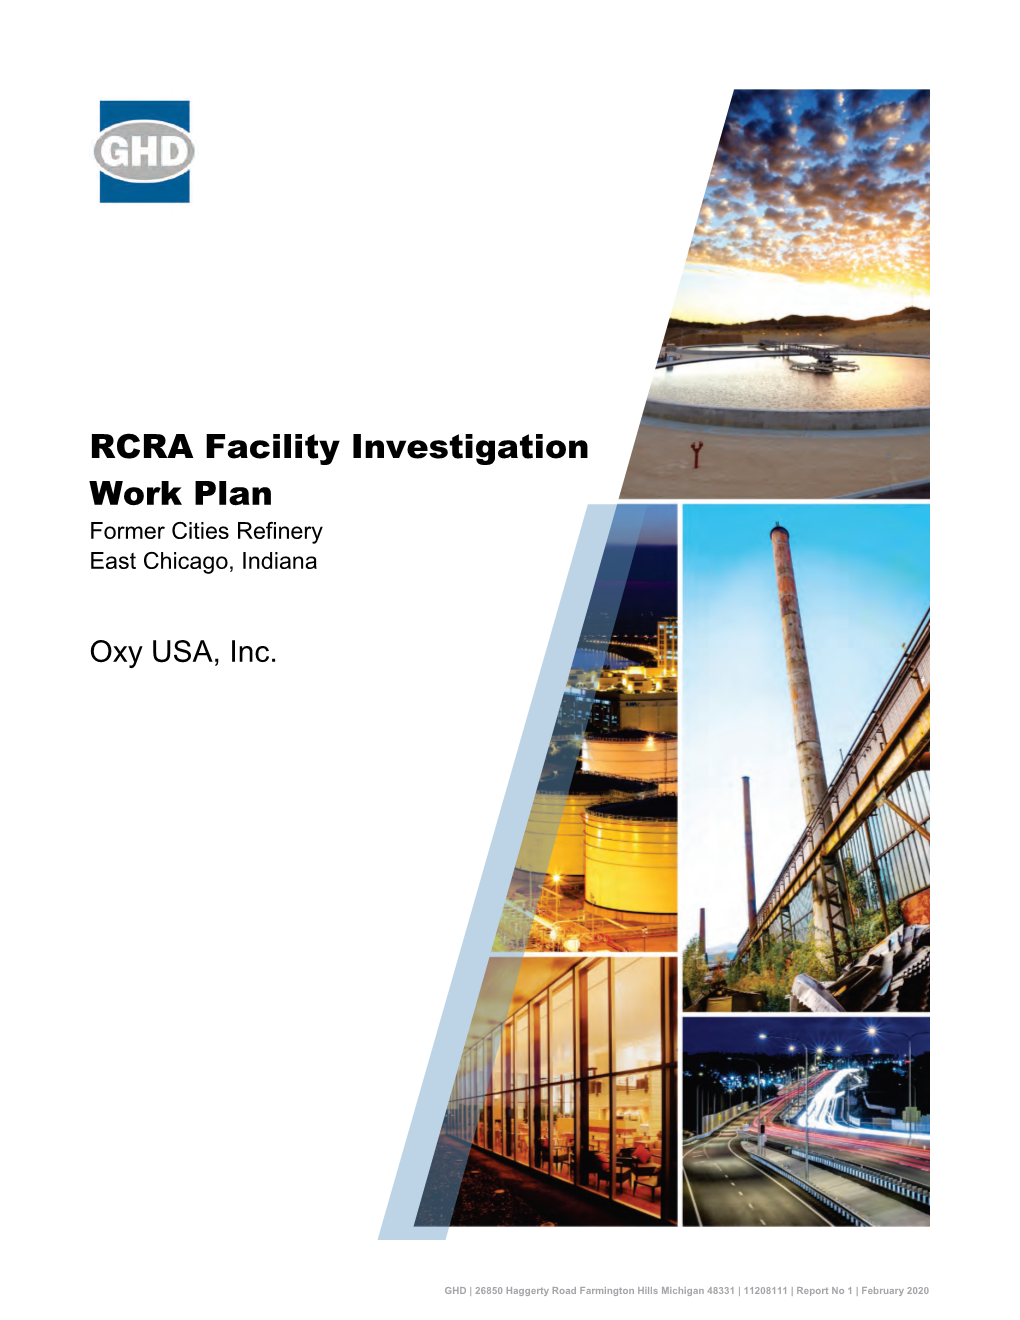 RCRA Facility Investigation Work Plan Former Cities Refinery East Chicago, Indiana